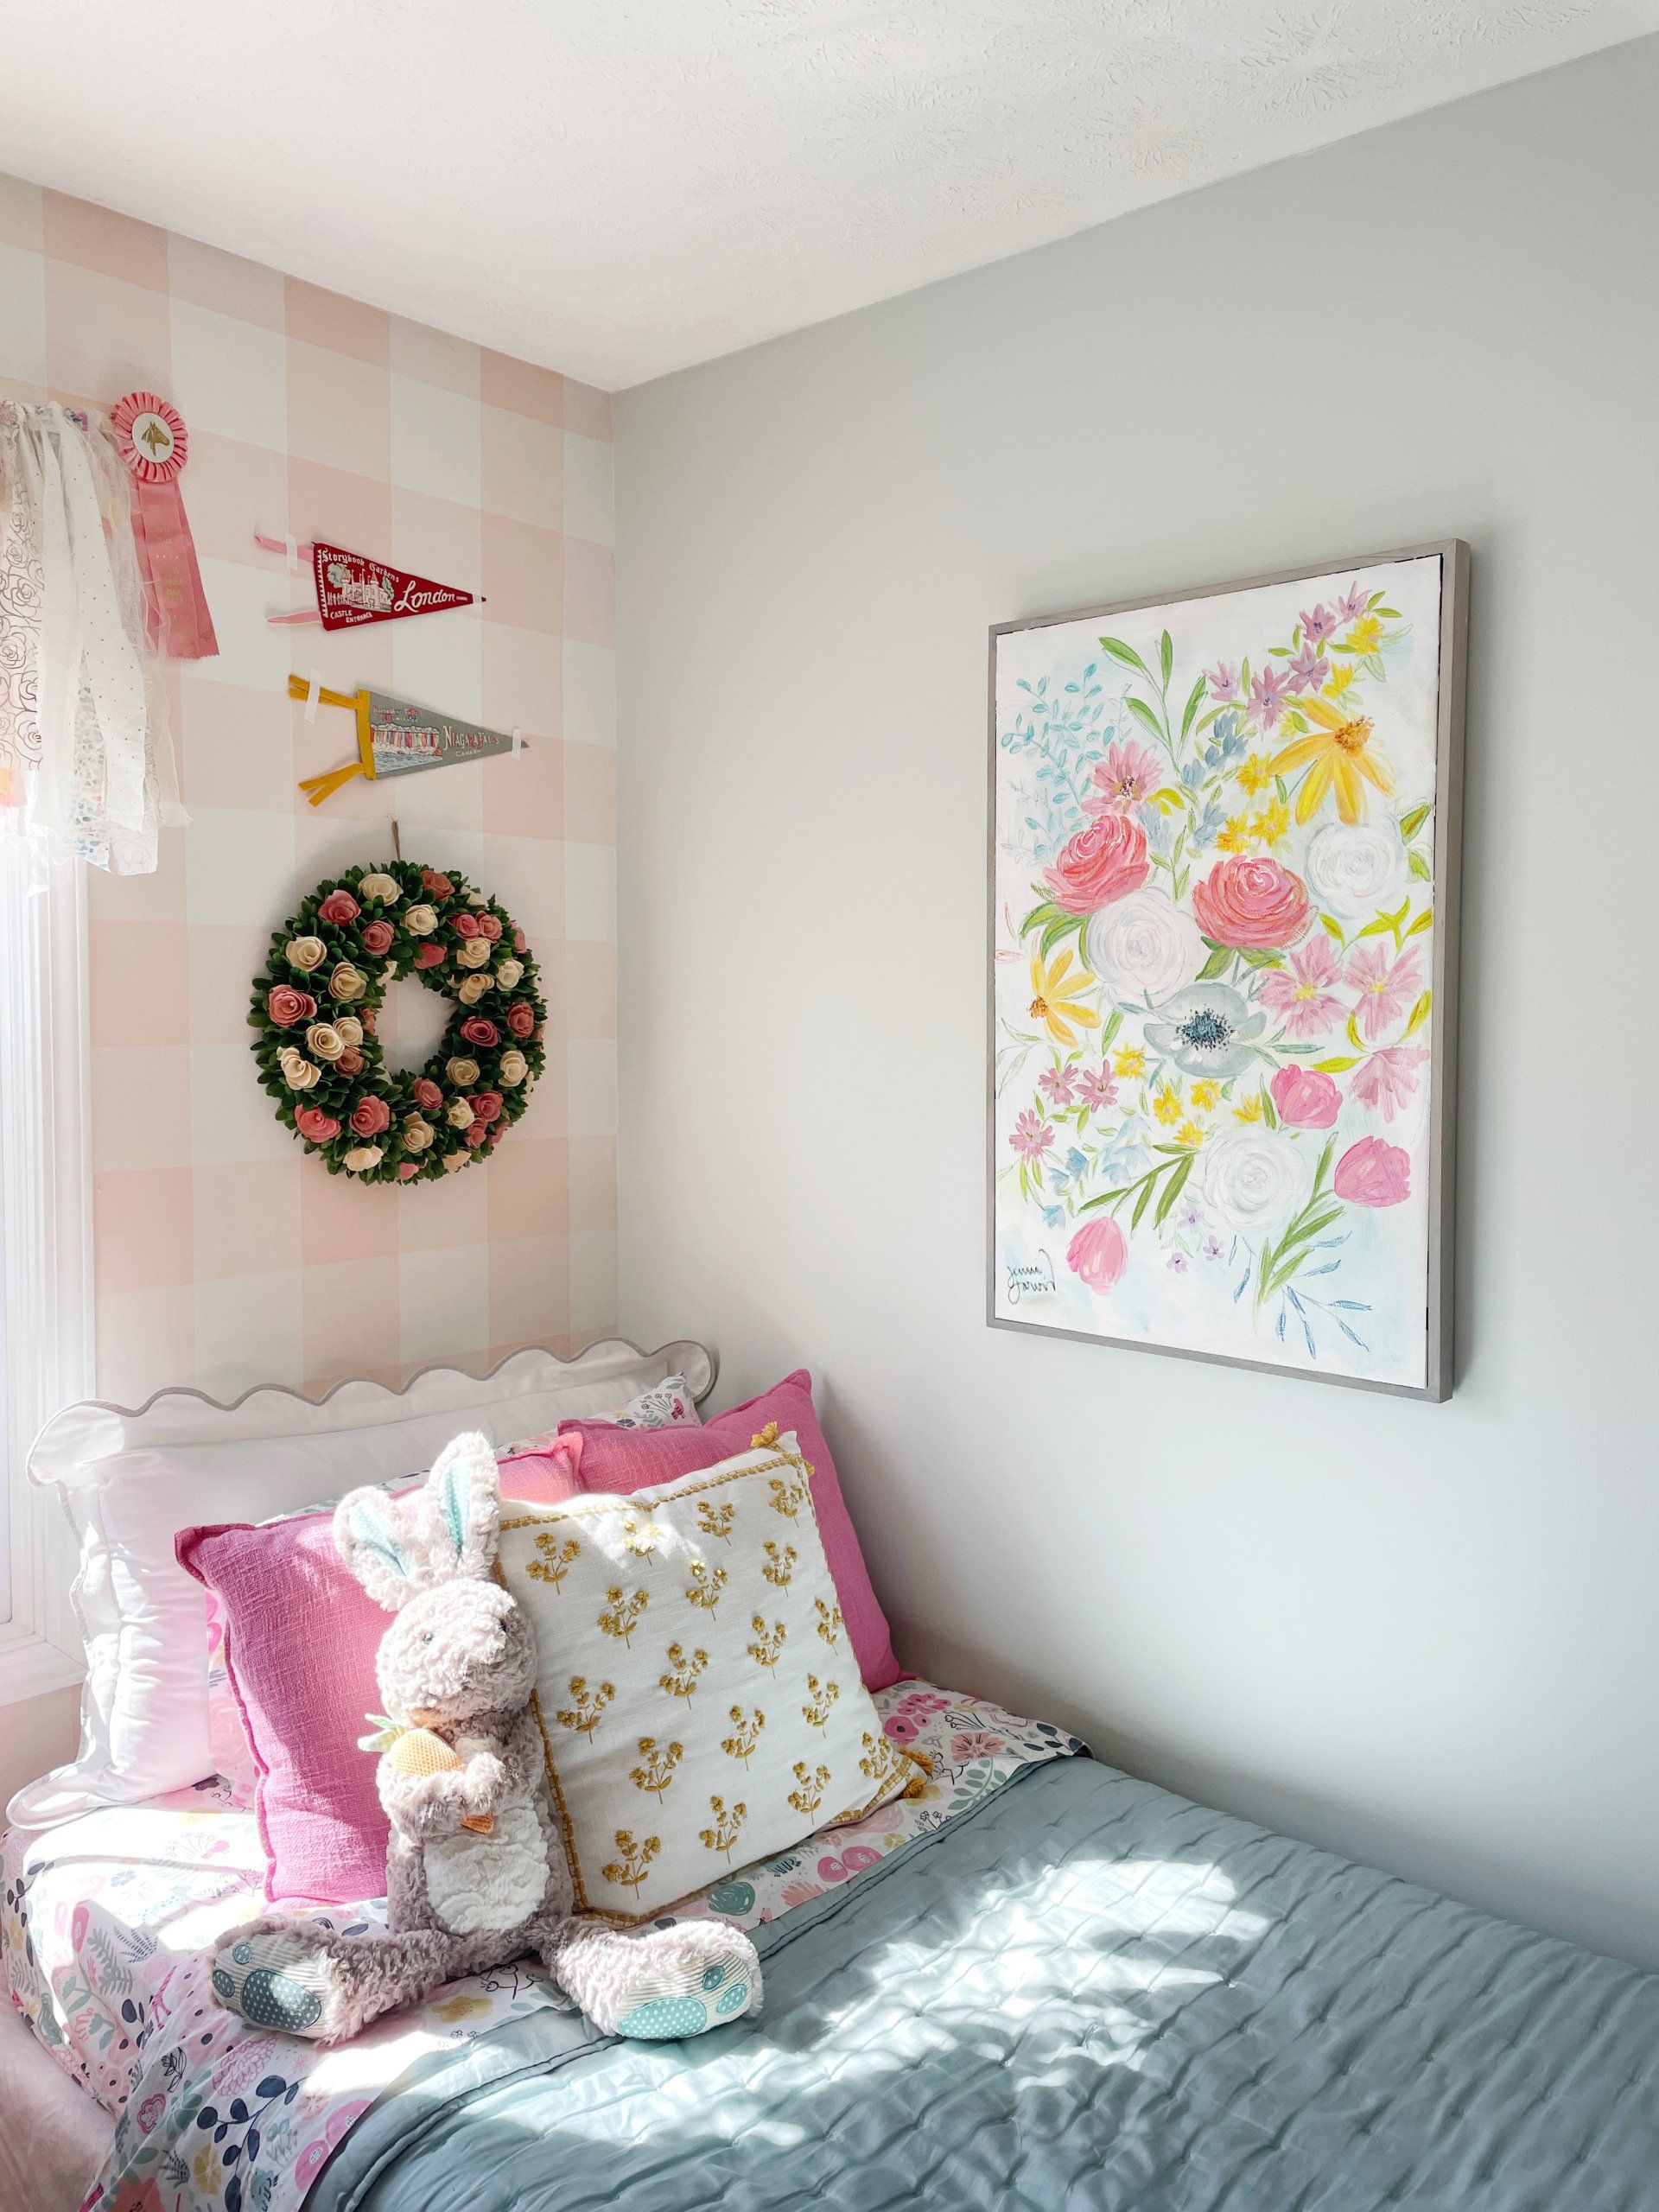 Large floral painting over little girl's bed